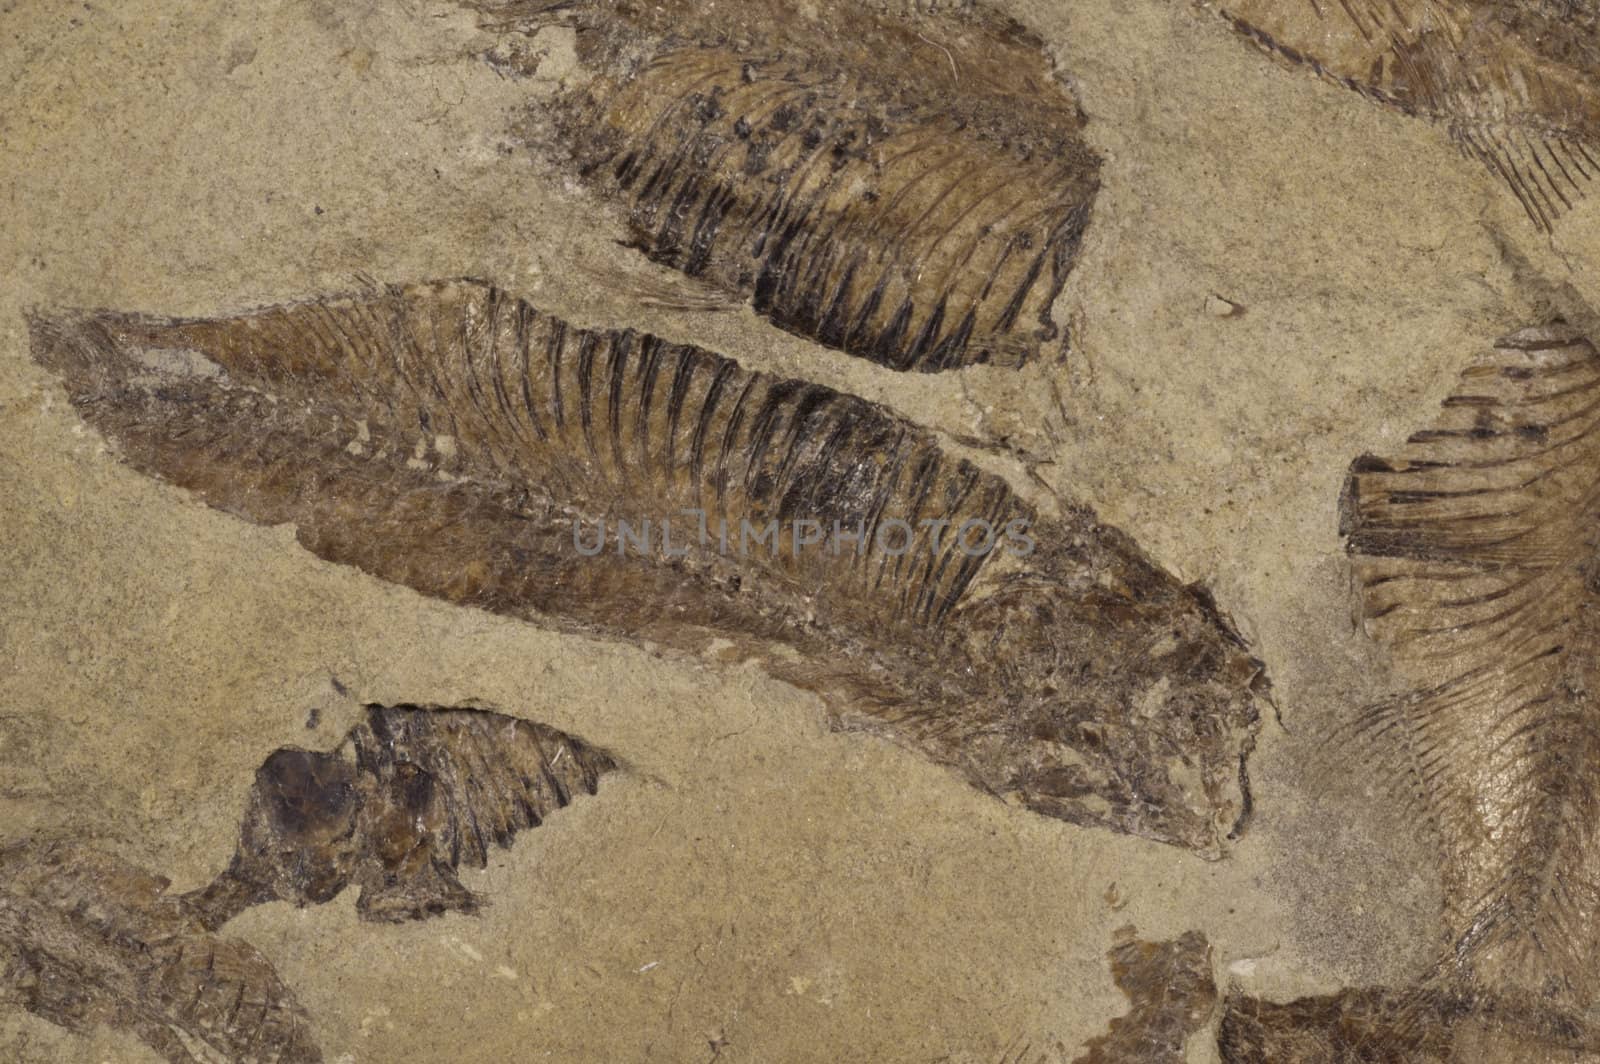 fossilised fish in a bed of sandstone
